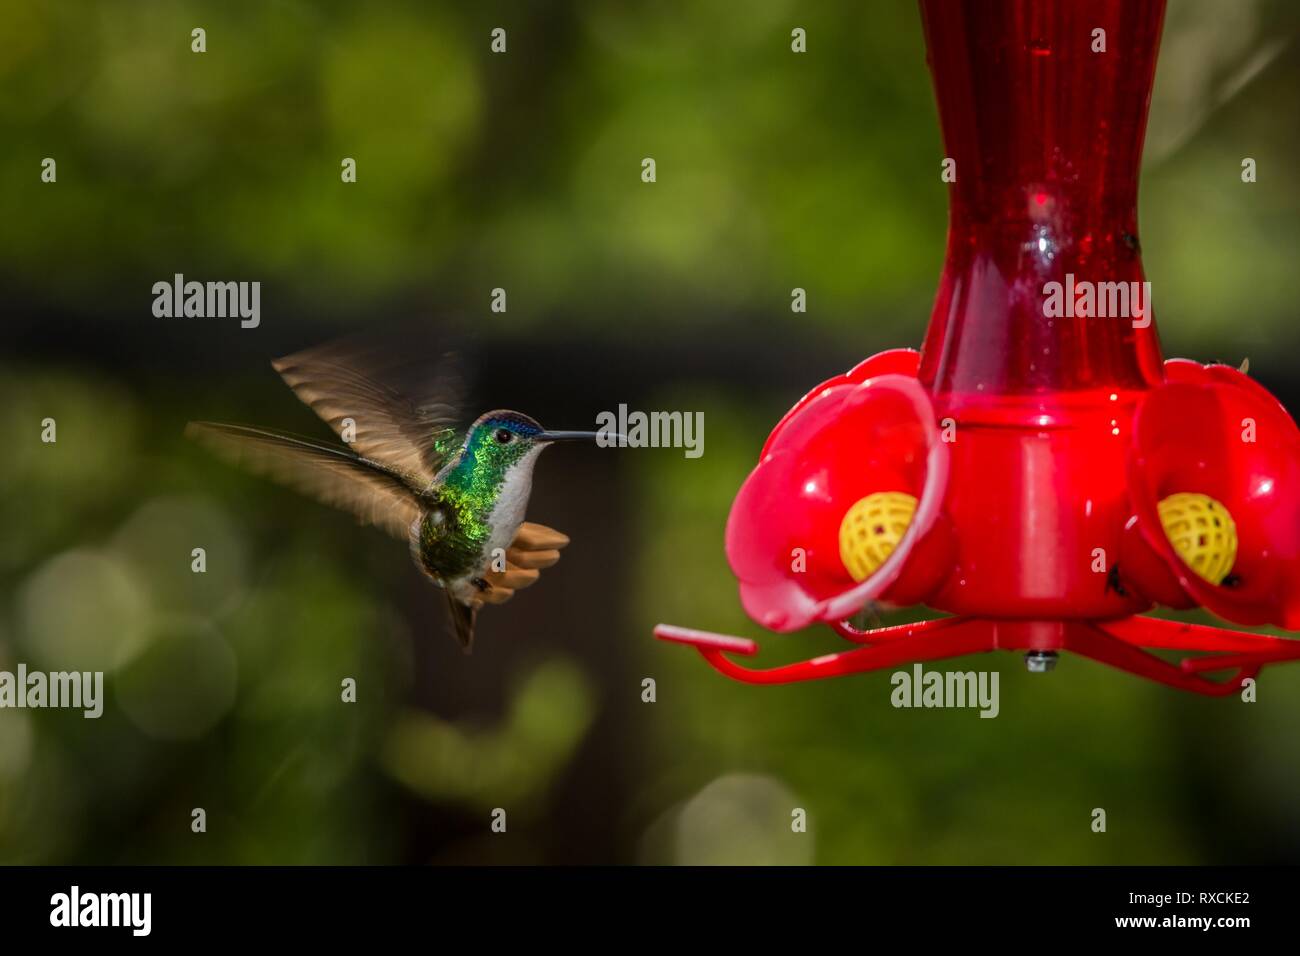 Hummingbird with outstretched wings,tropical forest,Peru,bird hovering next to red feeder with sugar water, garden,clear background,nature scene,wildl Stock Photo